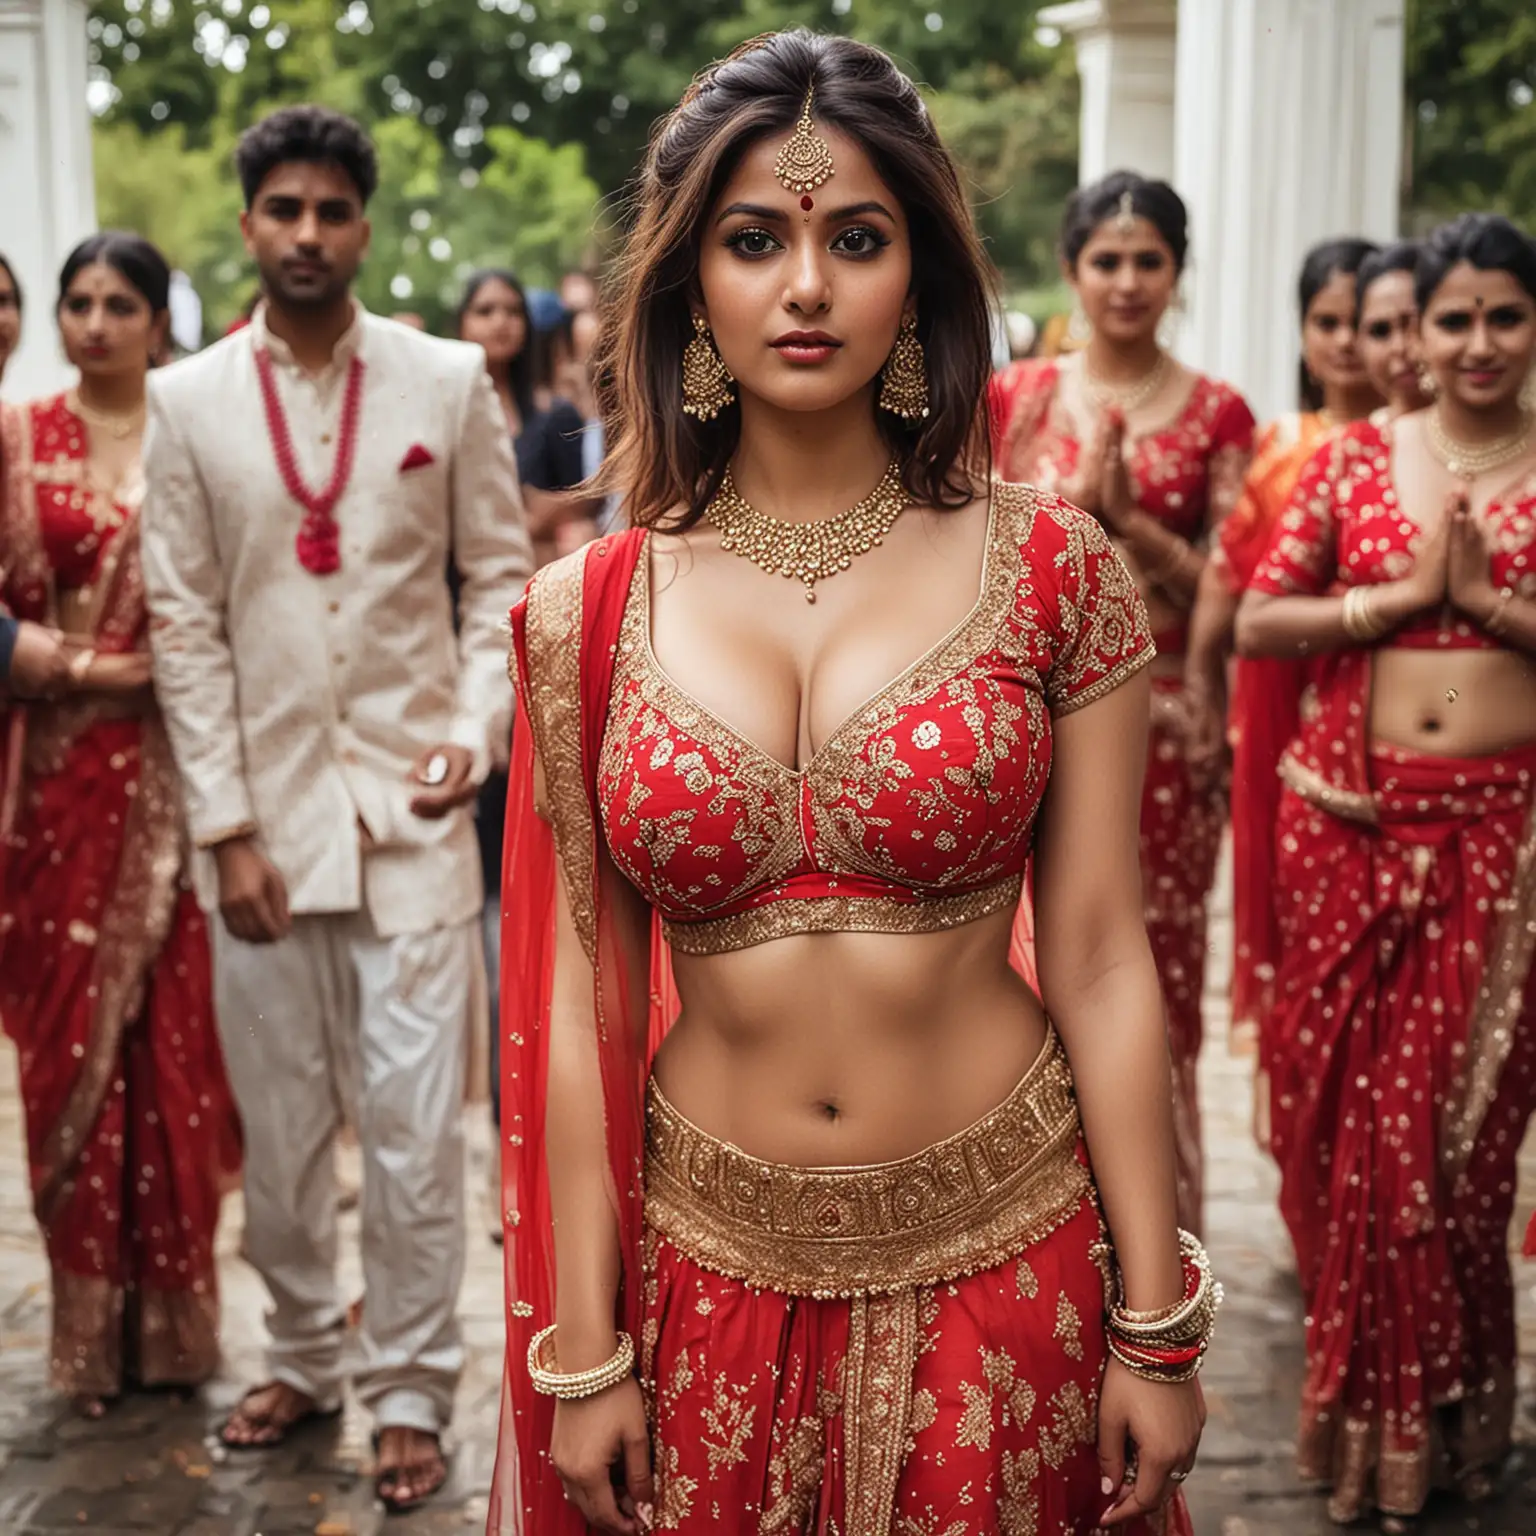 Indian-Woman-in-Red-Choli-and-Ghaghra-at-Wedding-Ceremony